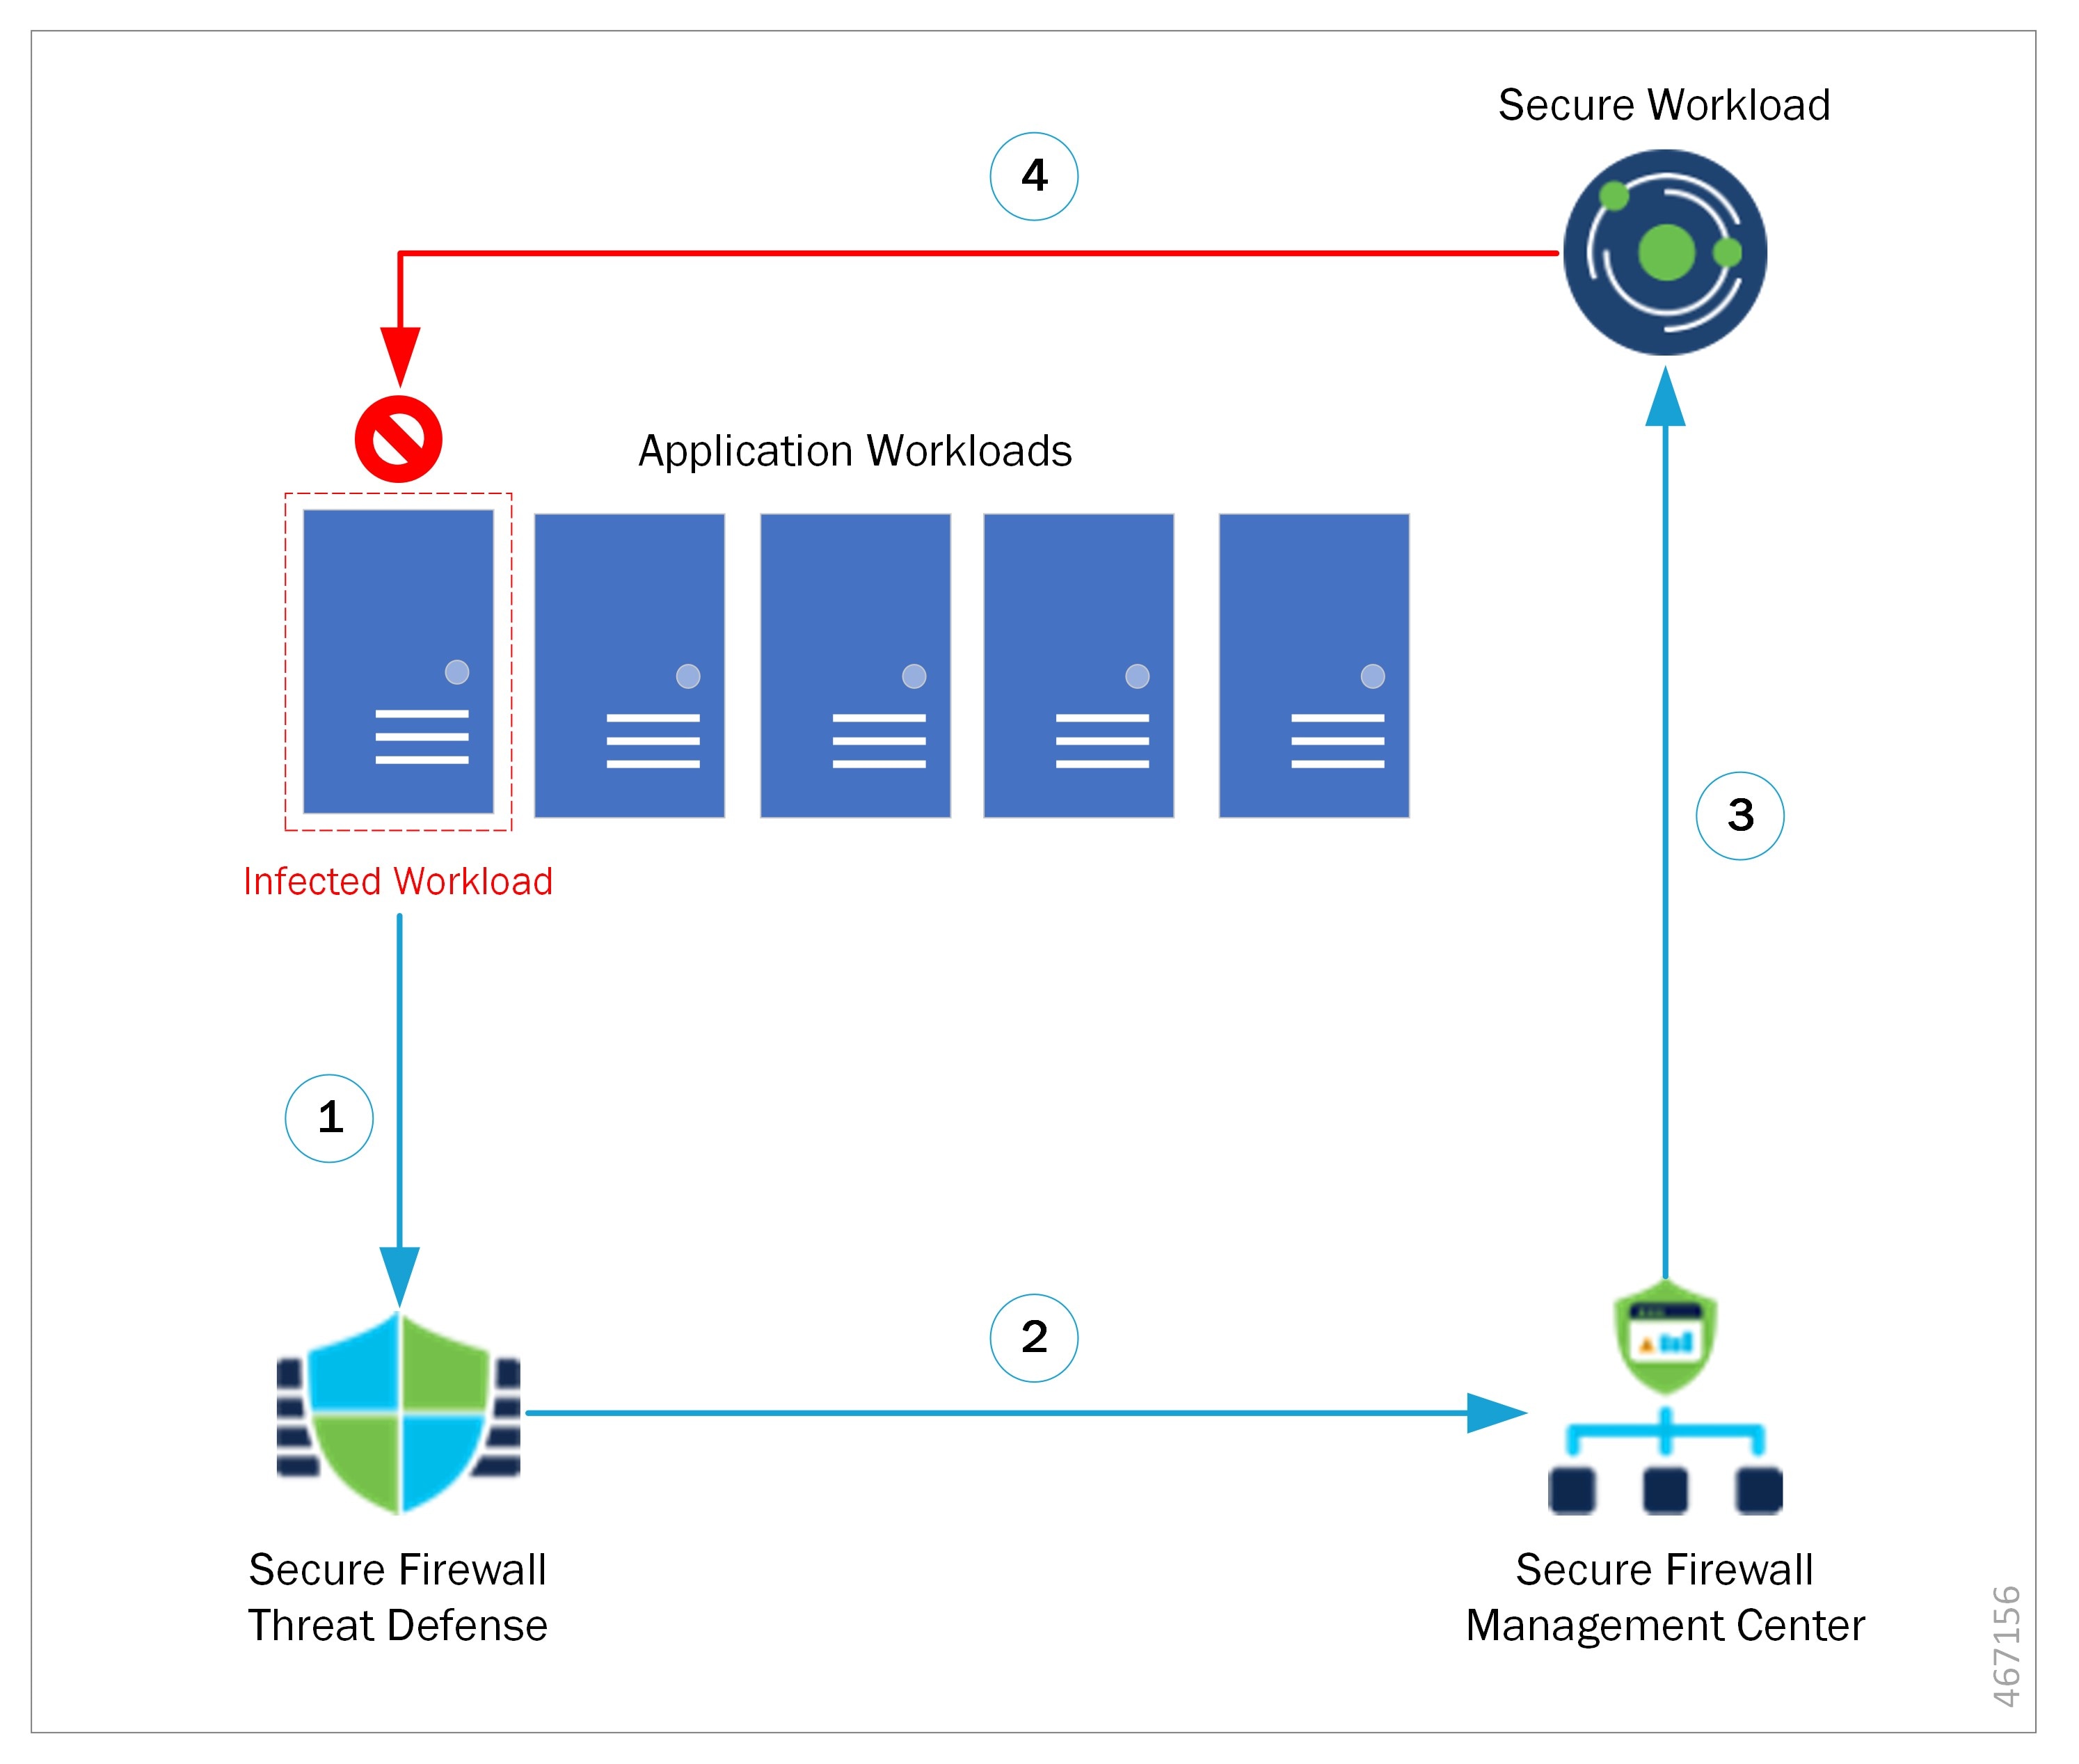 Secure Firewall Management Center to Secure Workload Rapid Threat Containment